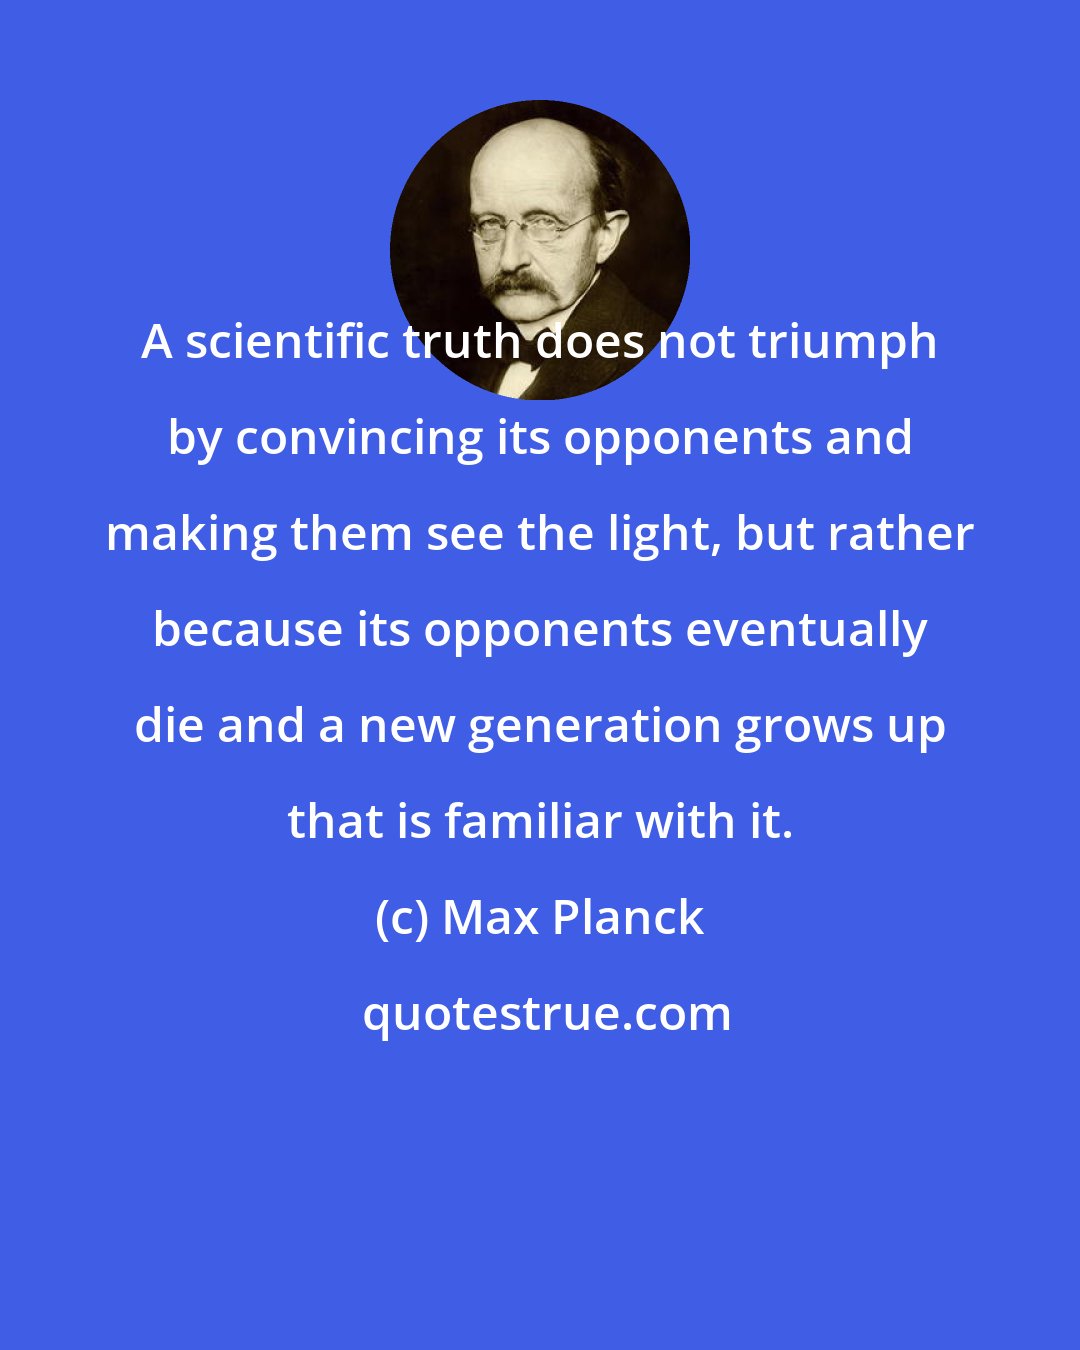 Max Planck: A scientific truth does not triumph by convincing its opponents and making them see the light, but rather because its opponents eventually die and a new generation grows up that is familiar with it.